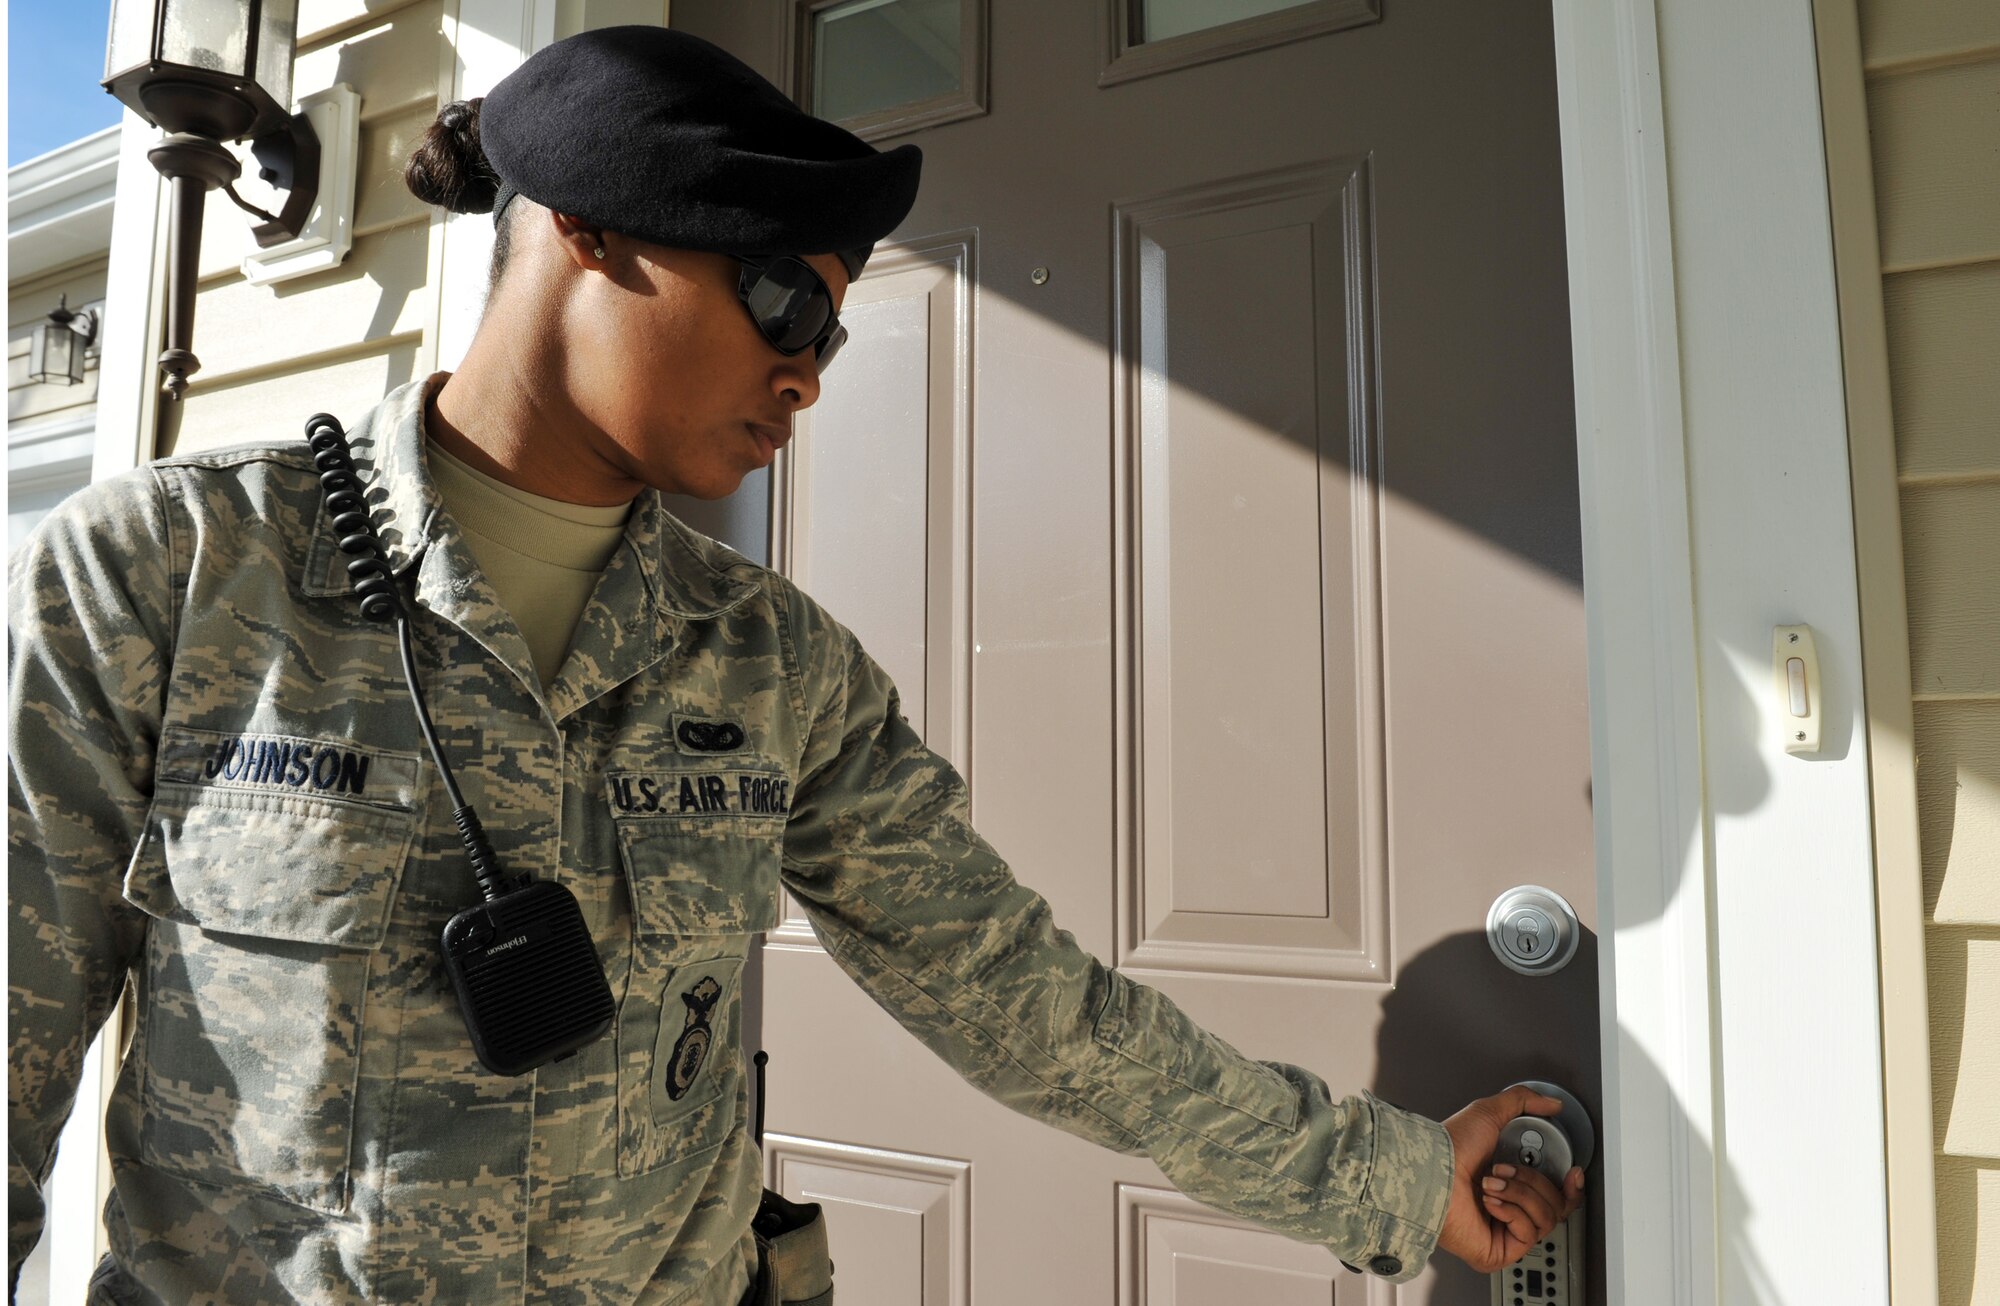 Senior Airman Keena Johnson, 509th Security Forces Squadron Law Enforcement, checks the front door at a base home at Whiteman Air Force Base during her shift Nov. 13. As part of Operation Quarters Watch, the 509th SFS will perform physical checks of the home and will notify the Law Enforcement Desk and the resident is  something is out of the ordinary. (U.S. Air Force photo/Heidi Hunt) (Released)  